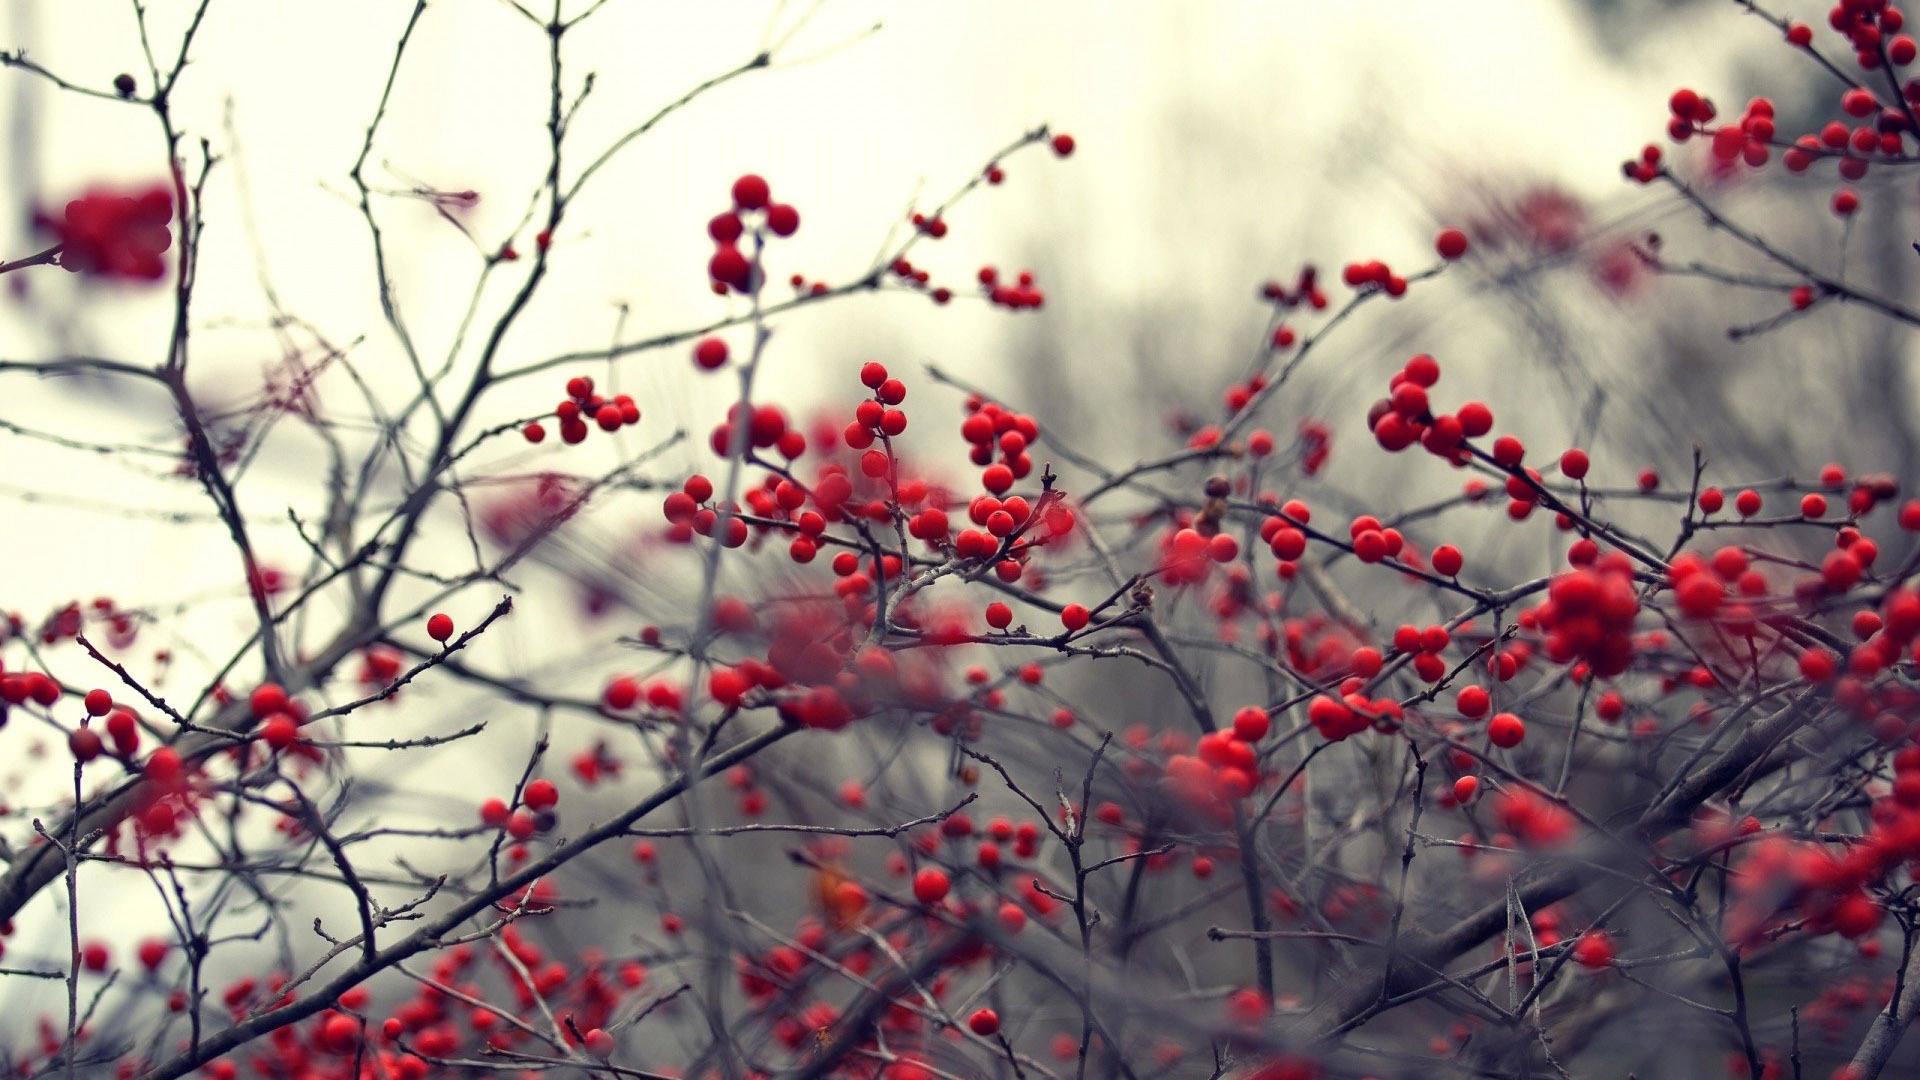 Red Berries On Branches Wallpaper Original HD